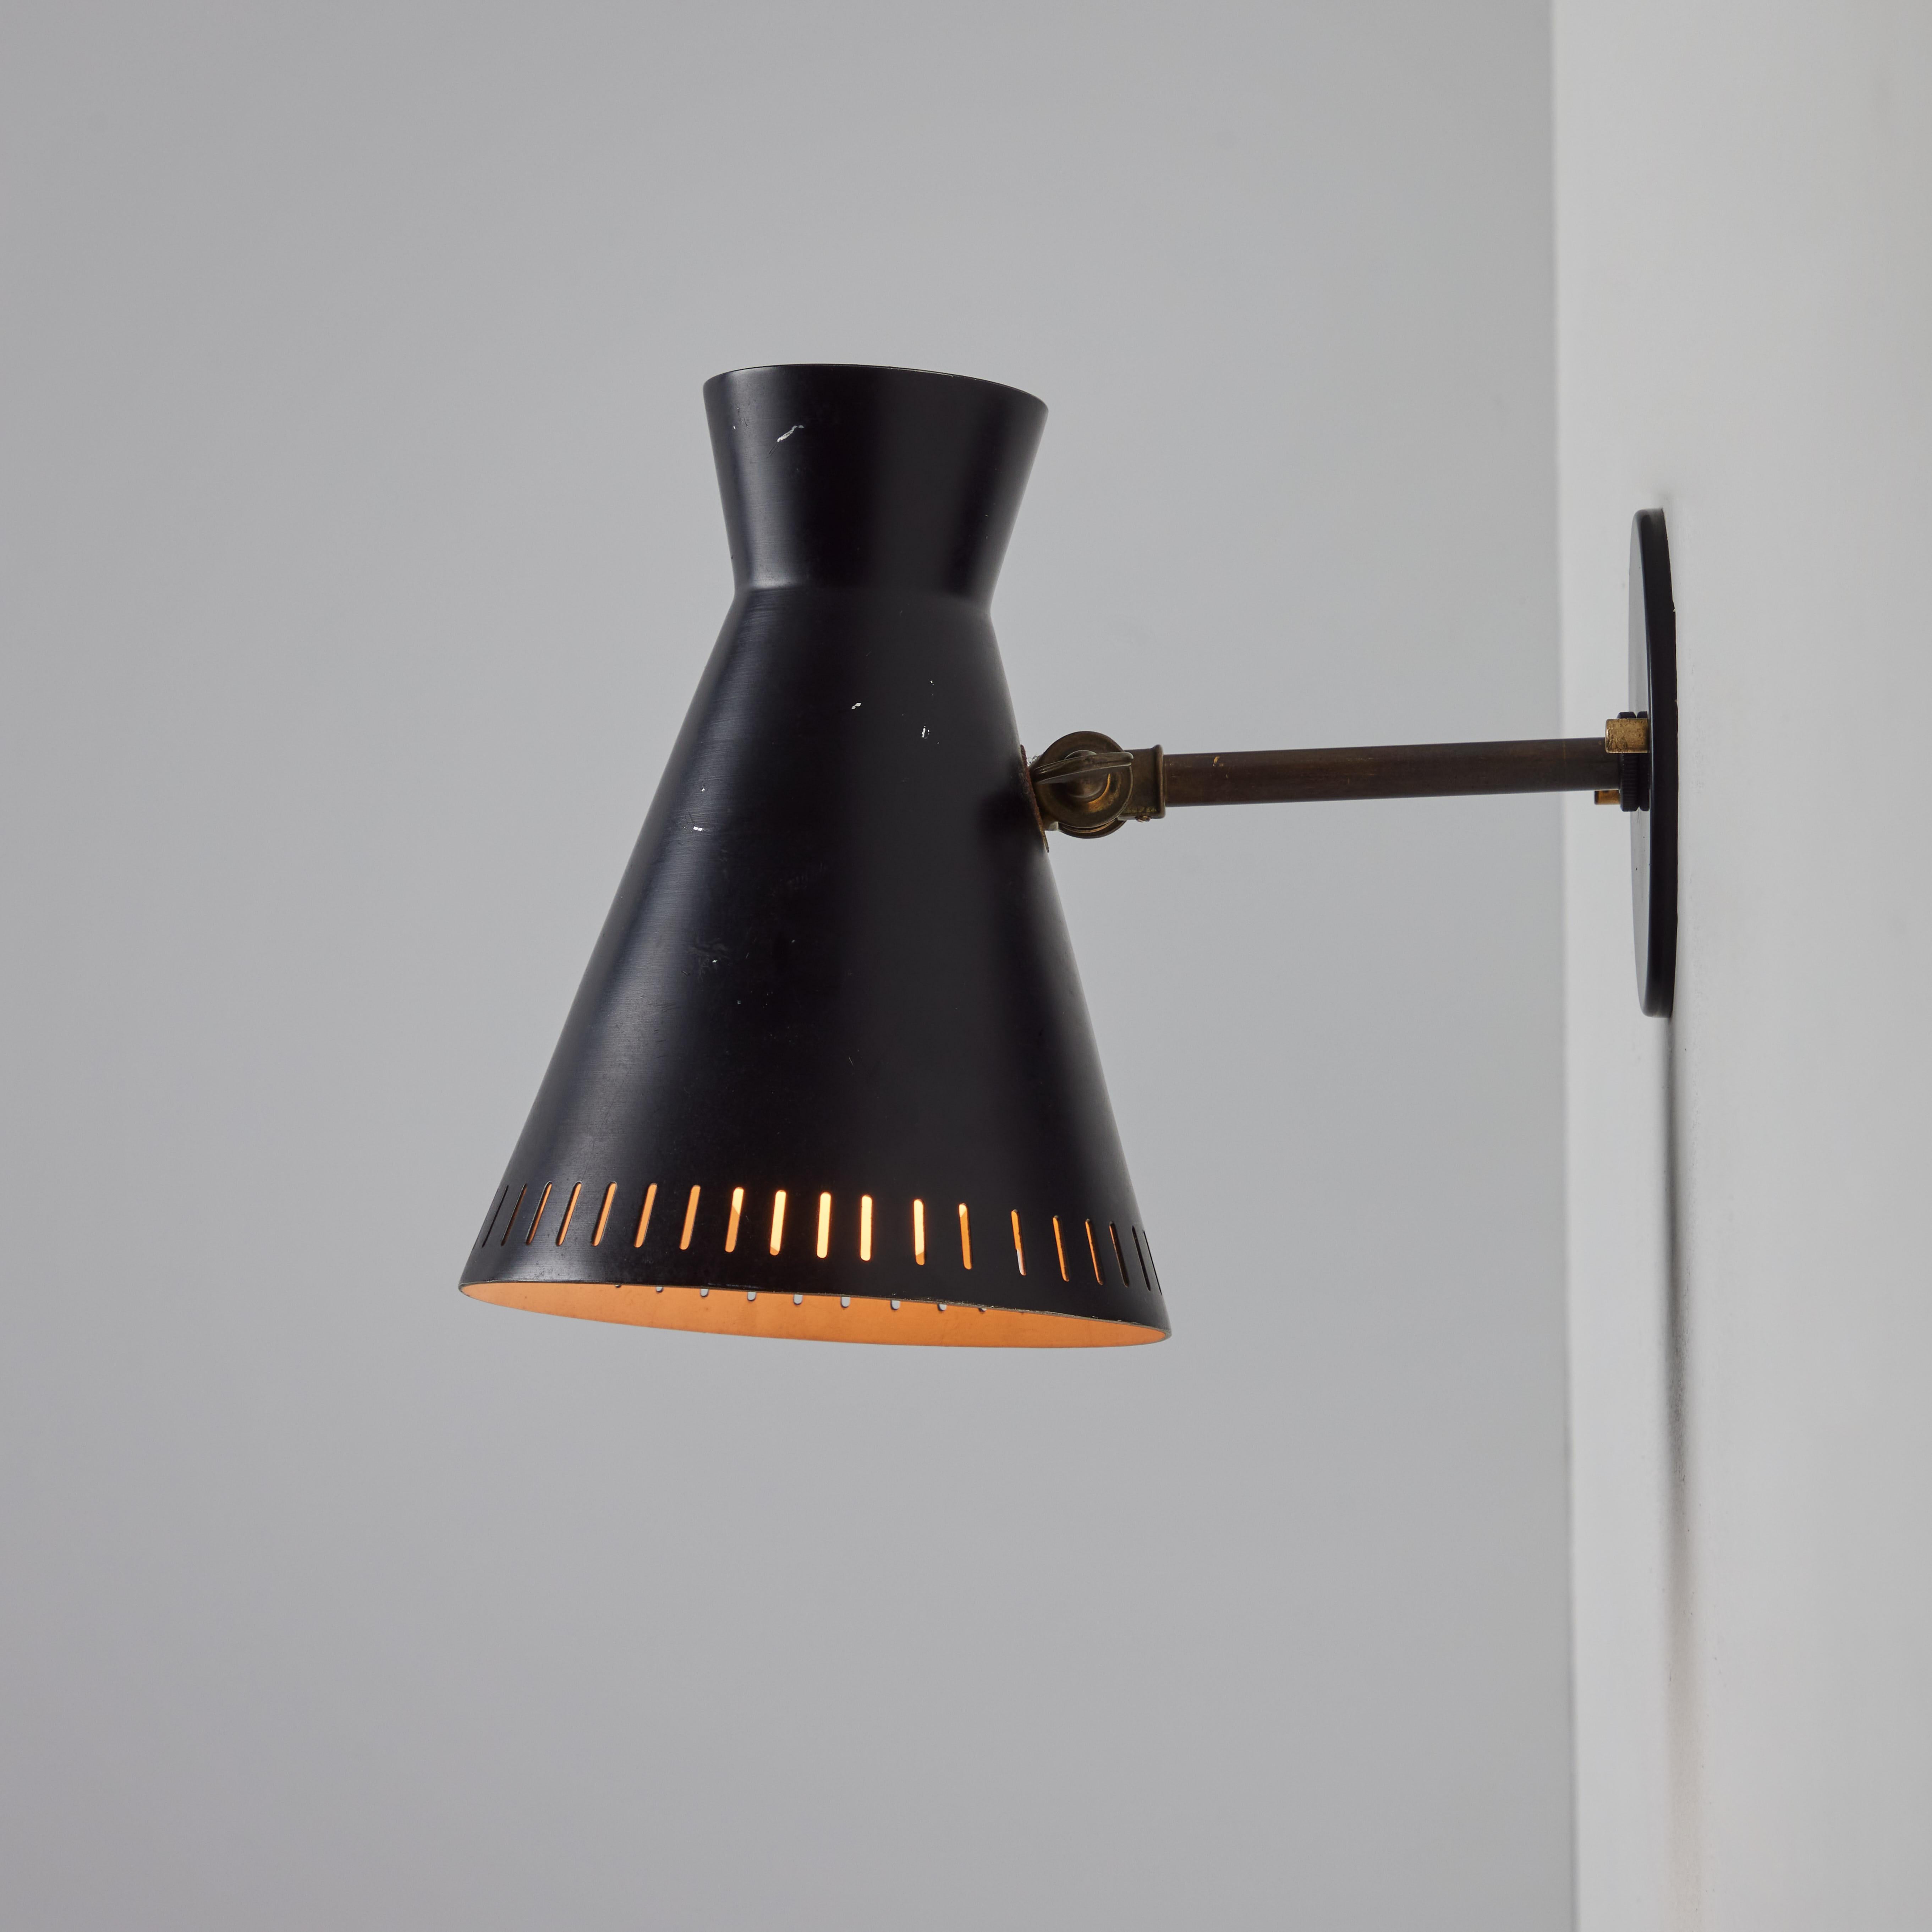 1950s Perforated Black Metal Diabolo Wall Lamp Attributed to Mauri Almari For Sale 1